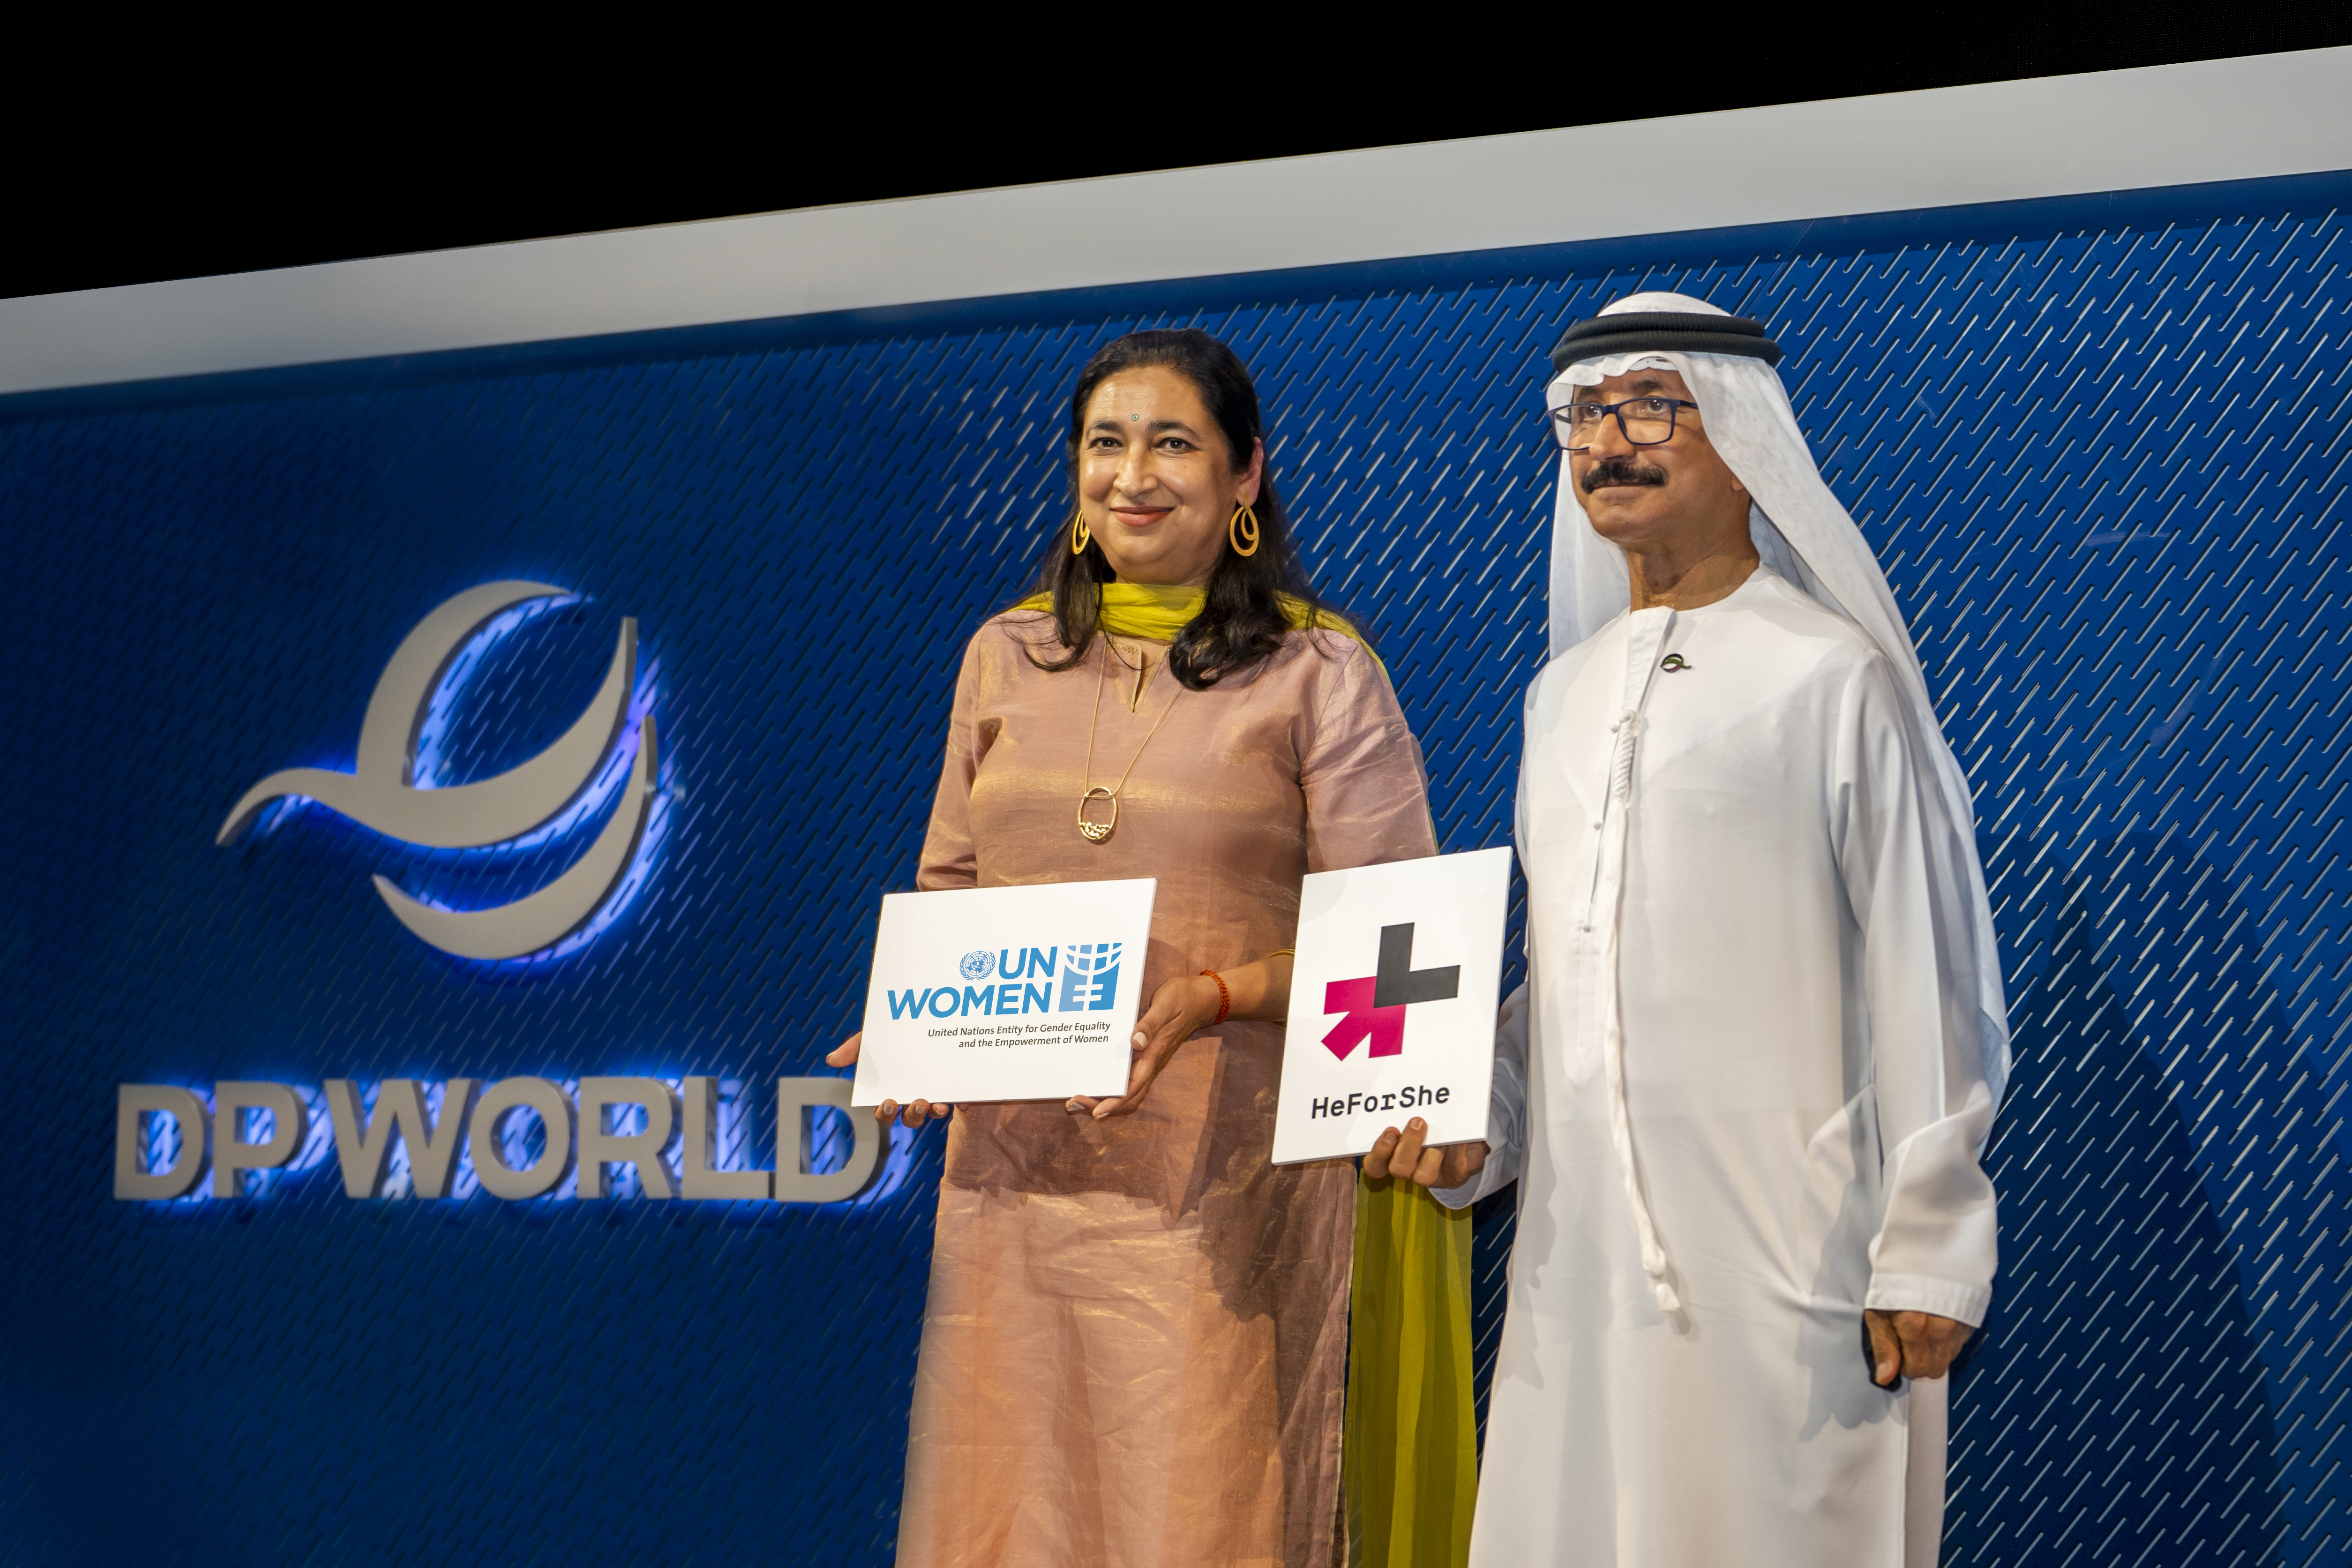 UN WOMEN ANNOUNCES DP WORLD GROUP CHAIRMAN AND CEO AS THE MIDDLE EAST'S  FIRST HeForShe CHAMPION FOR GENDER EQUALITY